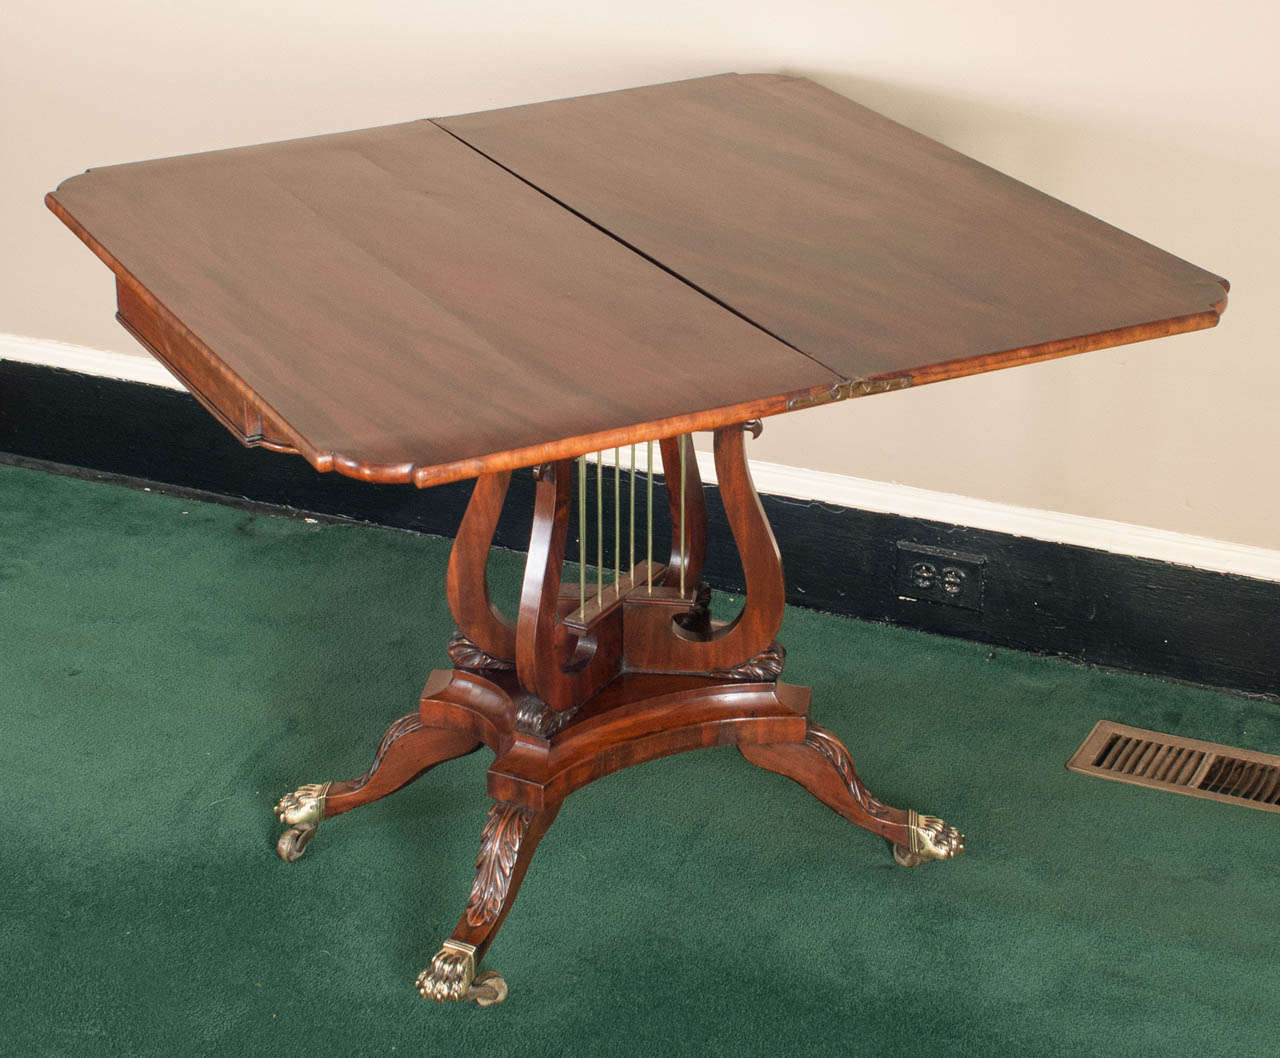 This exceptional Philadelphia games table was the product of a master cabinetmaker - the burled elm inlay is highly unusual - when opened, the top spins to initially reveal an inner compartment and folds out to lie flat in card-table dimensions (see